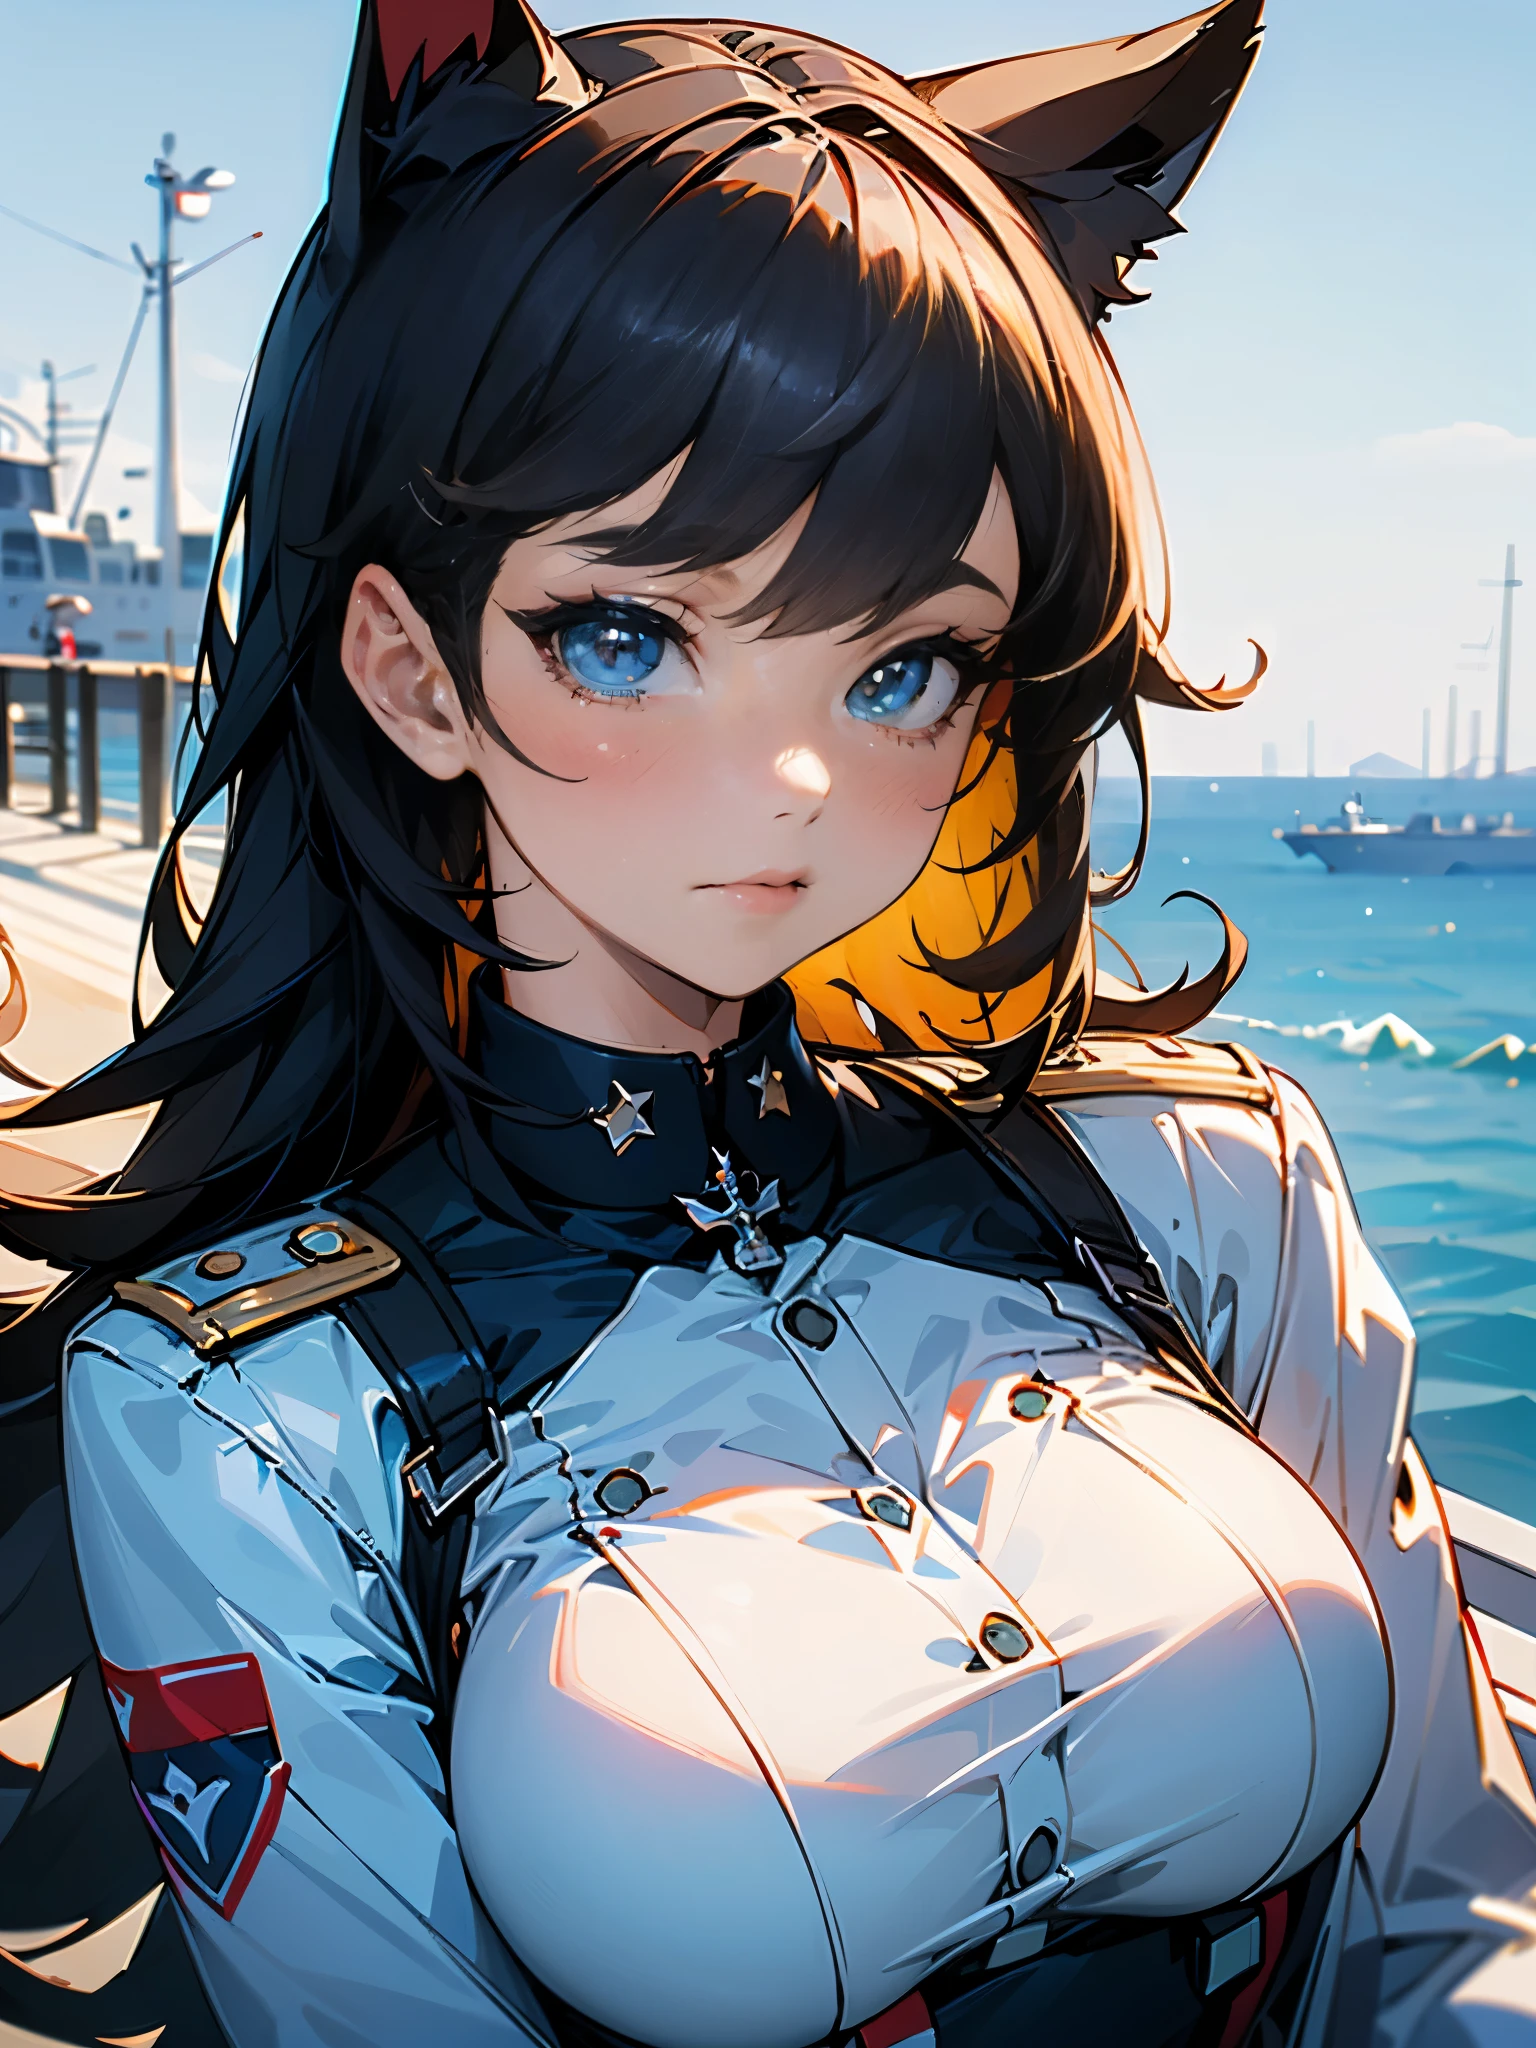 (masterpiece, best quality, RAW photo, intricate details) portrait, head and shoulders, 1girl / Atago / medium dark hair, blues eyes, cat ears, large breasts, curvaceous body, (wearing admirals uniform), seaport background, blue sky, Azur lane, catgirl, admiralty, medals, academy, military, marine, navy